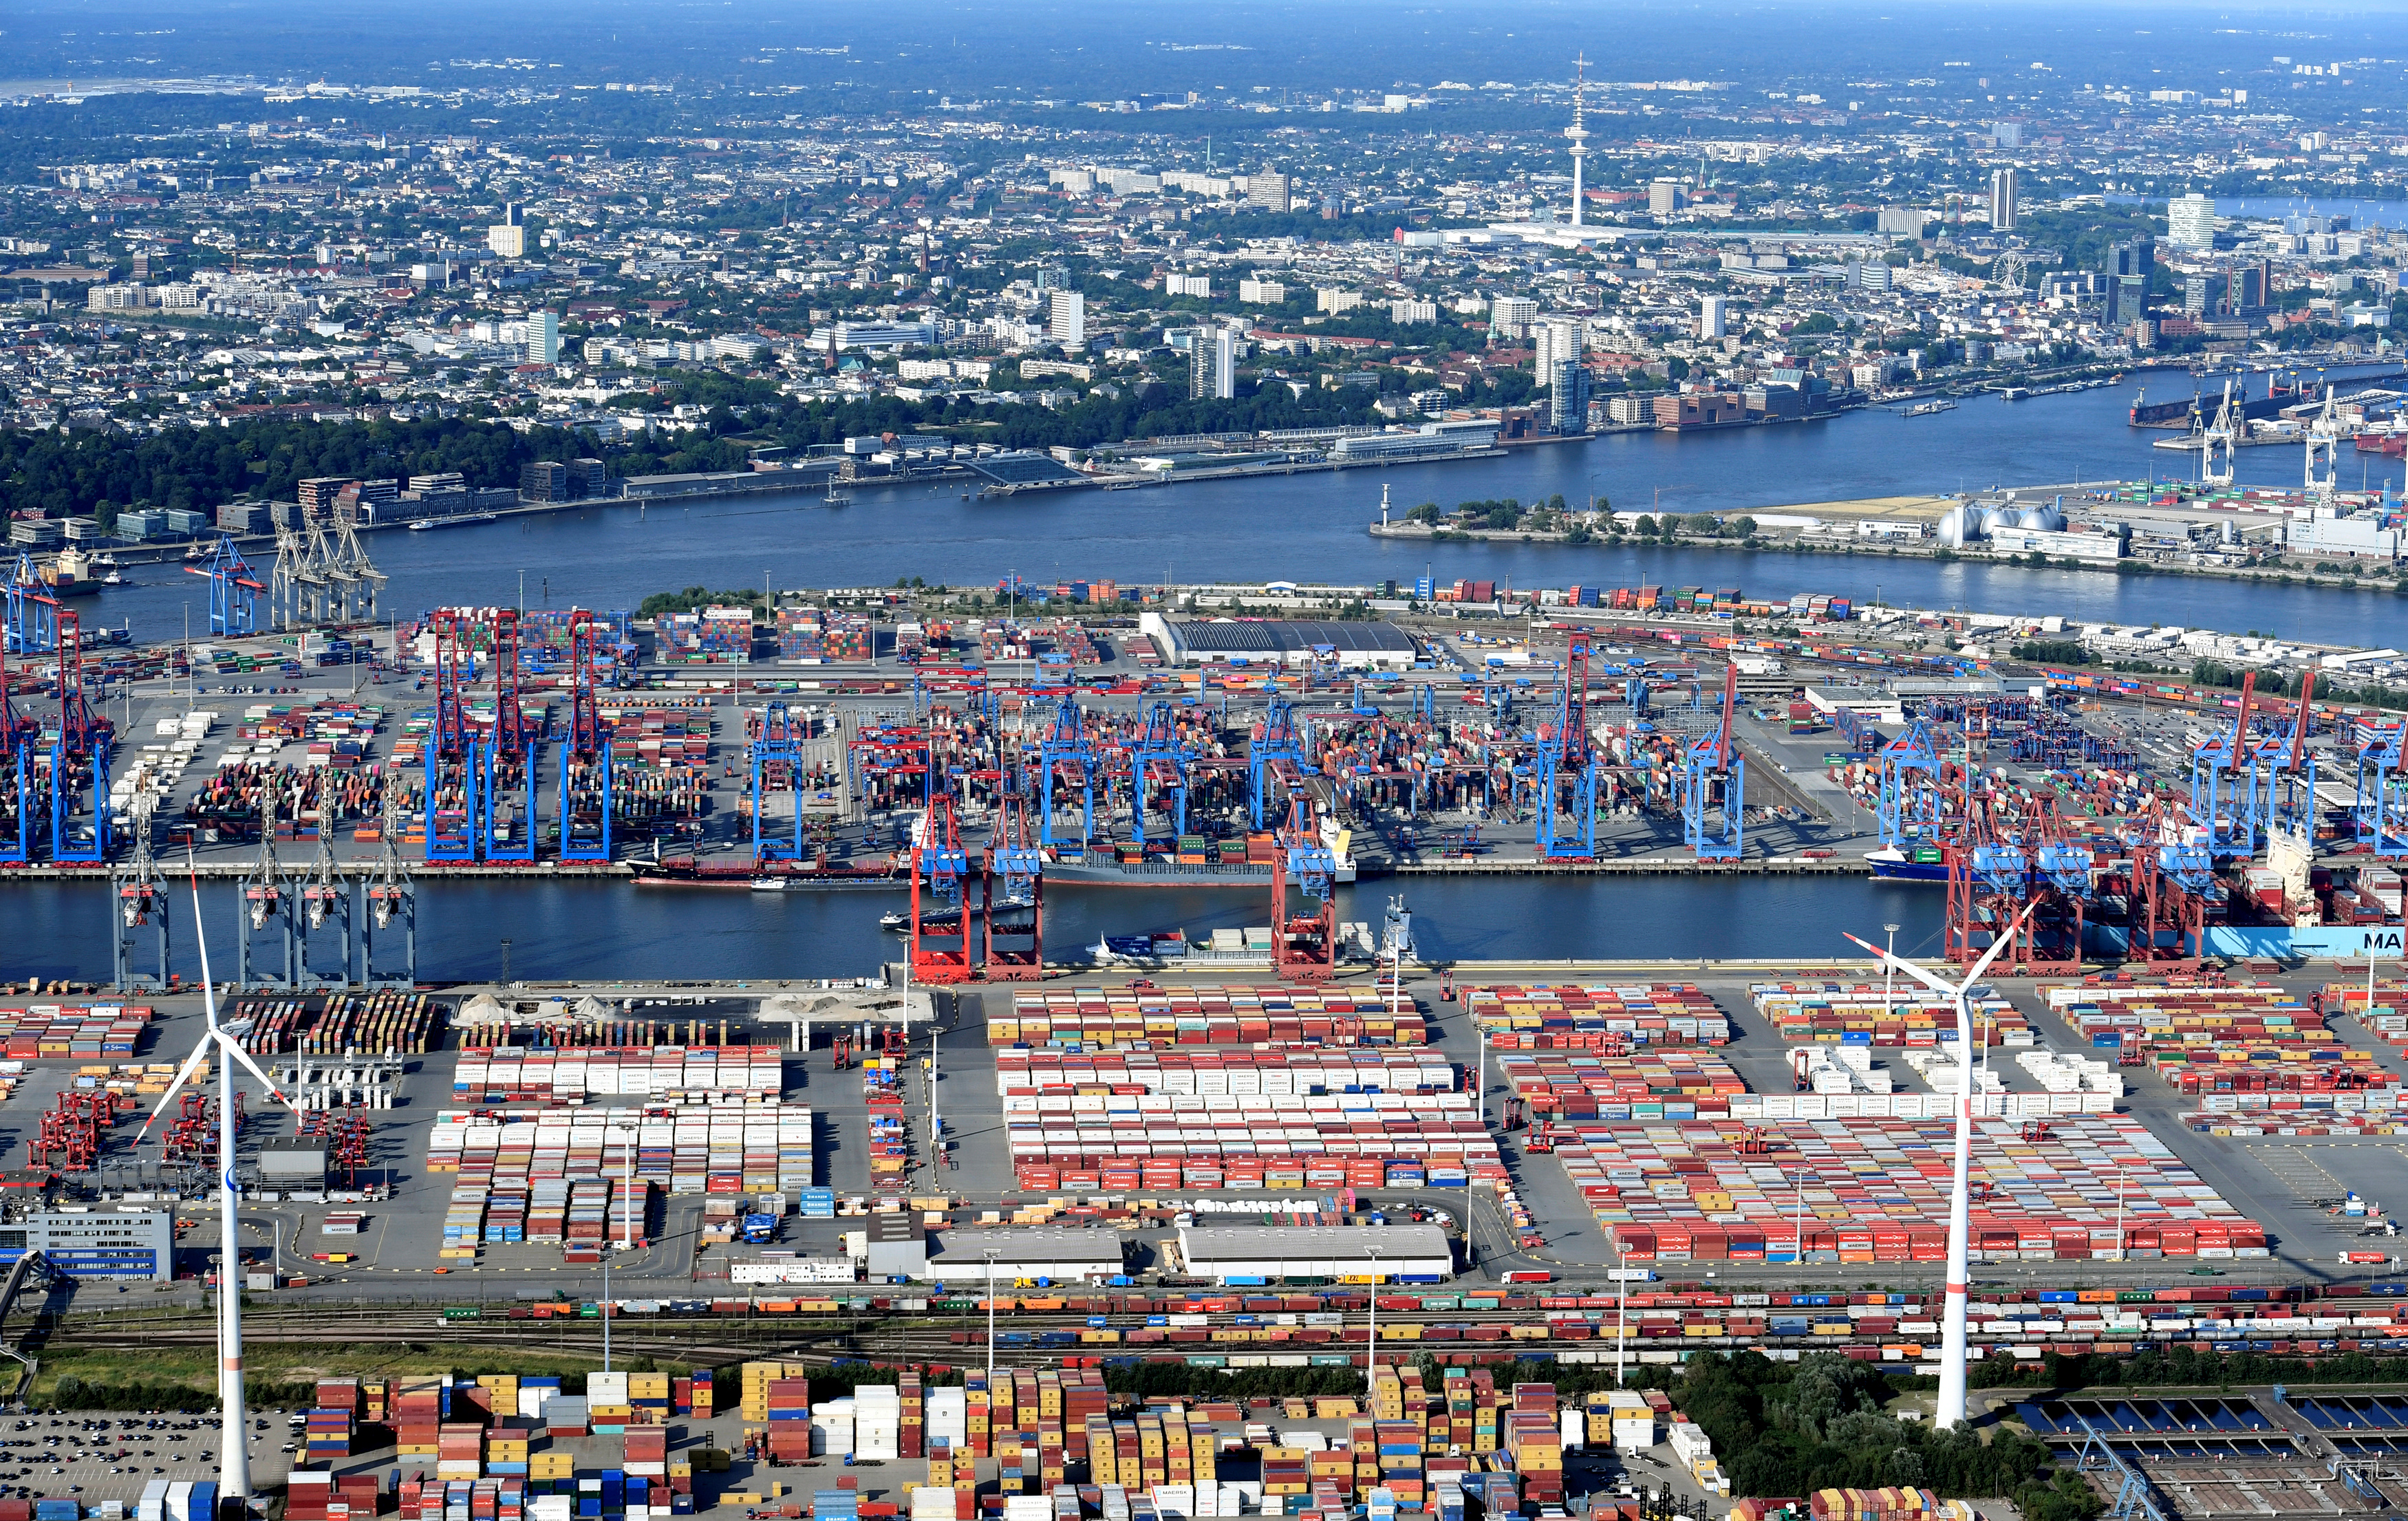 Aerial view of containers at a loading terminal in the port of Hamburg, Germany August 1, 2018. REUTERS/Fabian Bimmer/File Photo